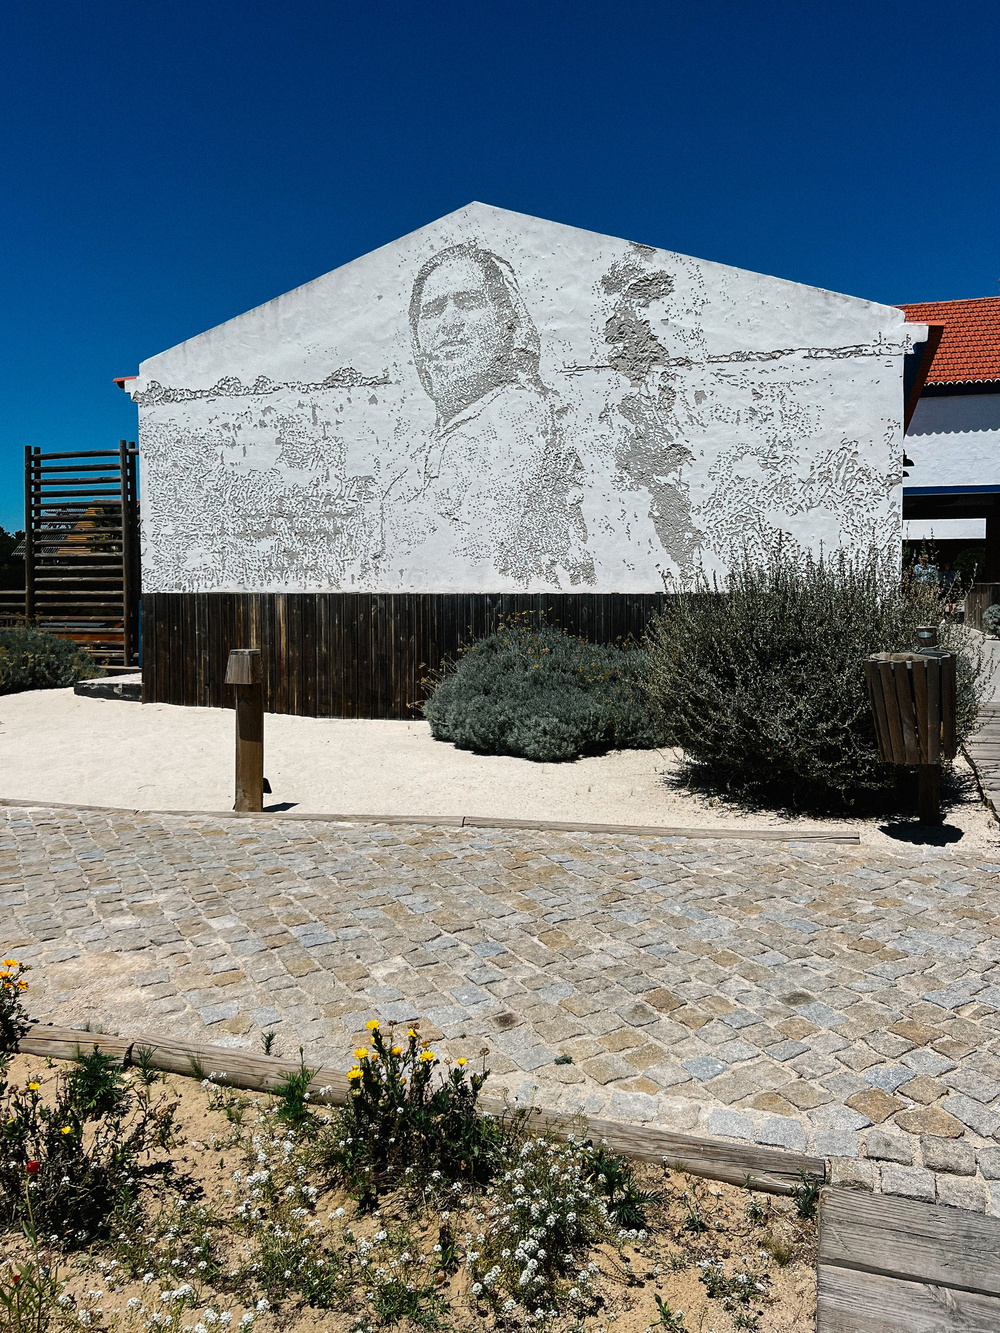 A white building with a mural depicting a human figure in a textured, dotted style. The building sits in a landscaped area with cobblestone pathways, sparse greenery, and a clear blue sky overhead.